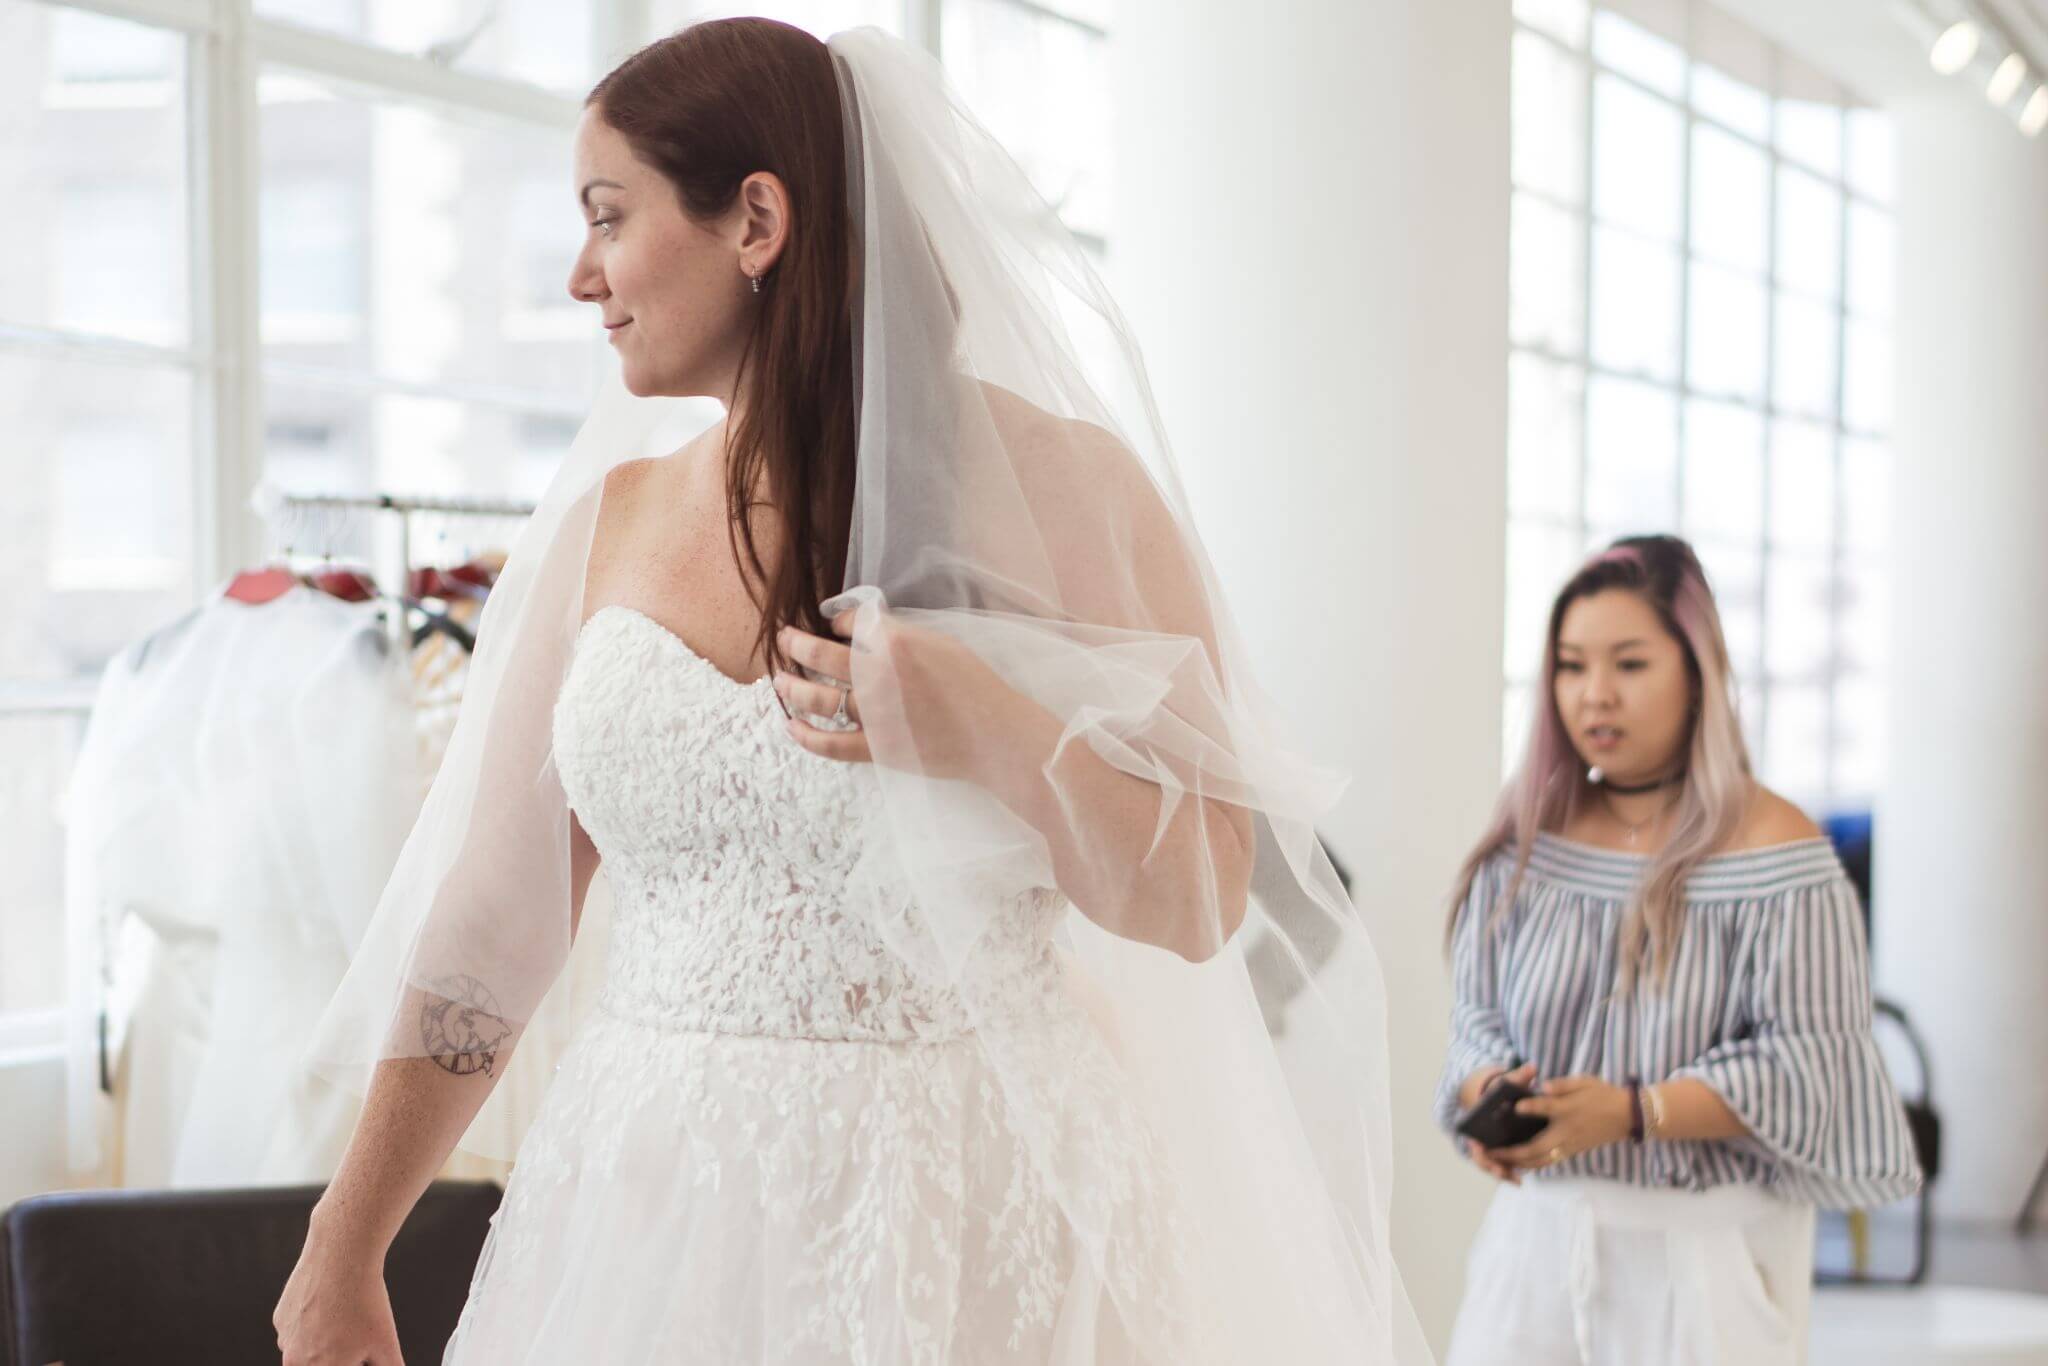 How to Keep a Strapless Wedding Dress from Falling Down